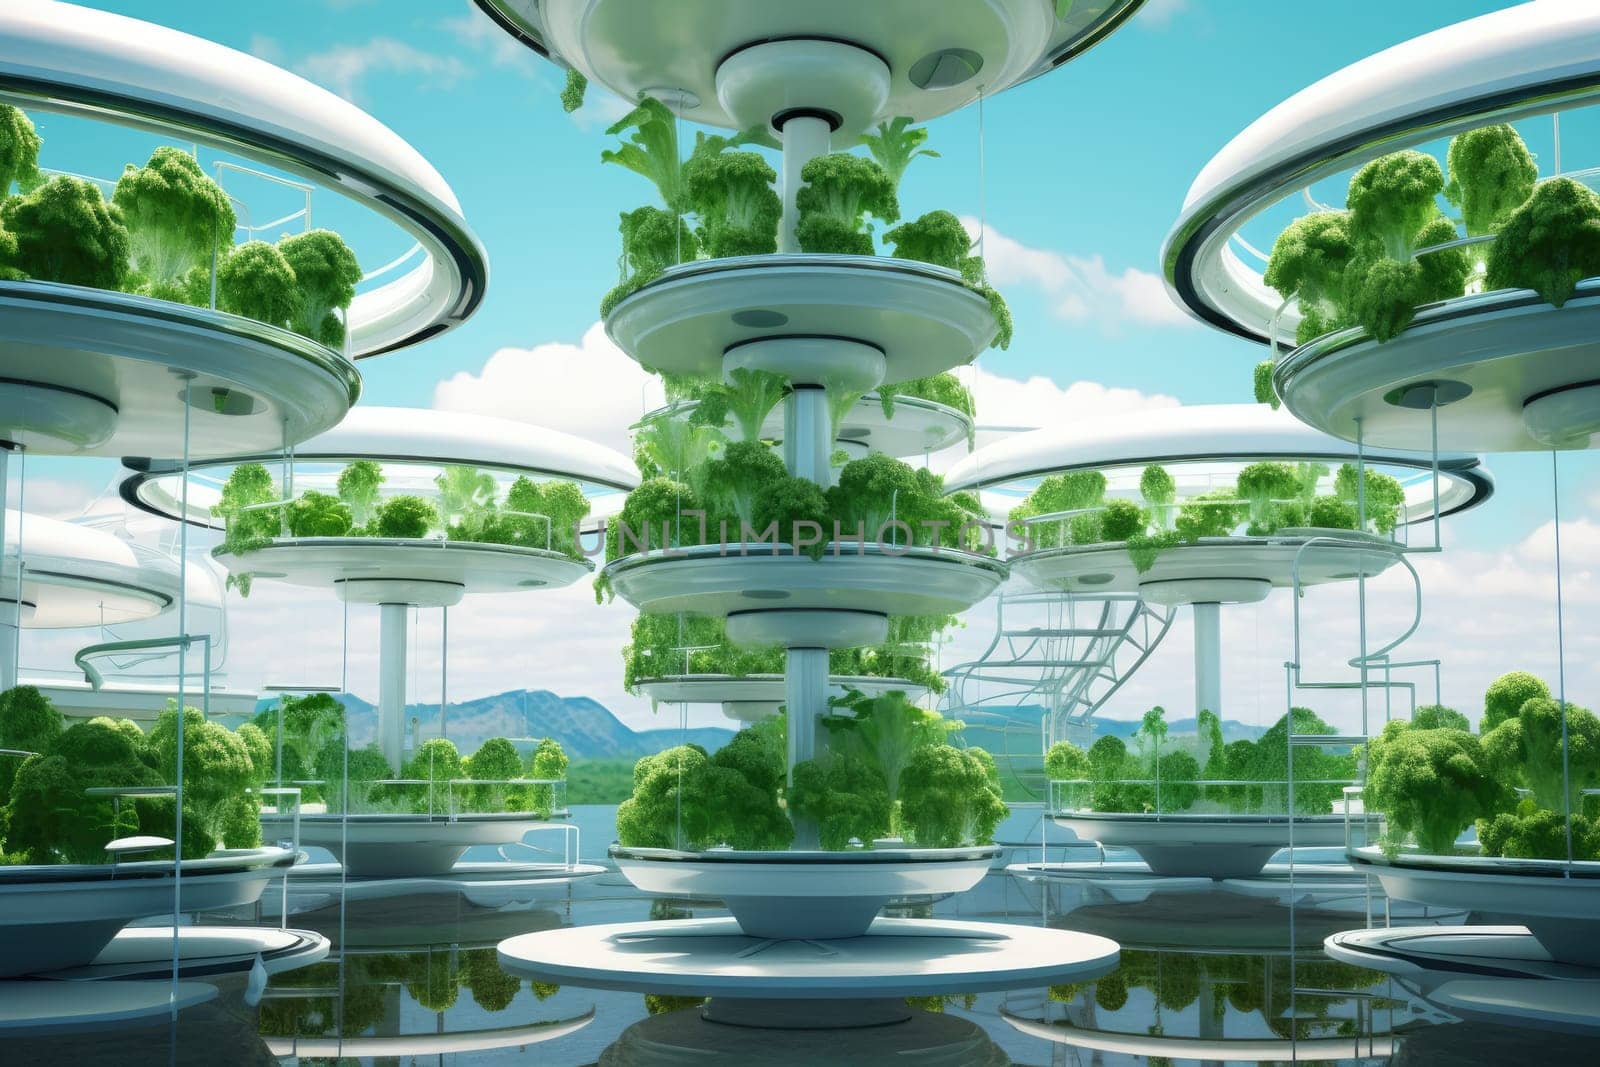 A close-up of a hydroponic plant cultivation system, showcasing the process of growing plants without soil, using nutrient solutions in a controlled environment.